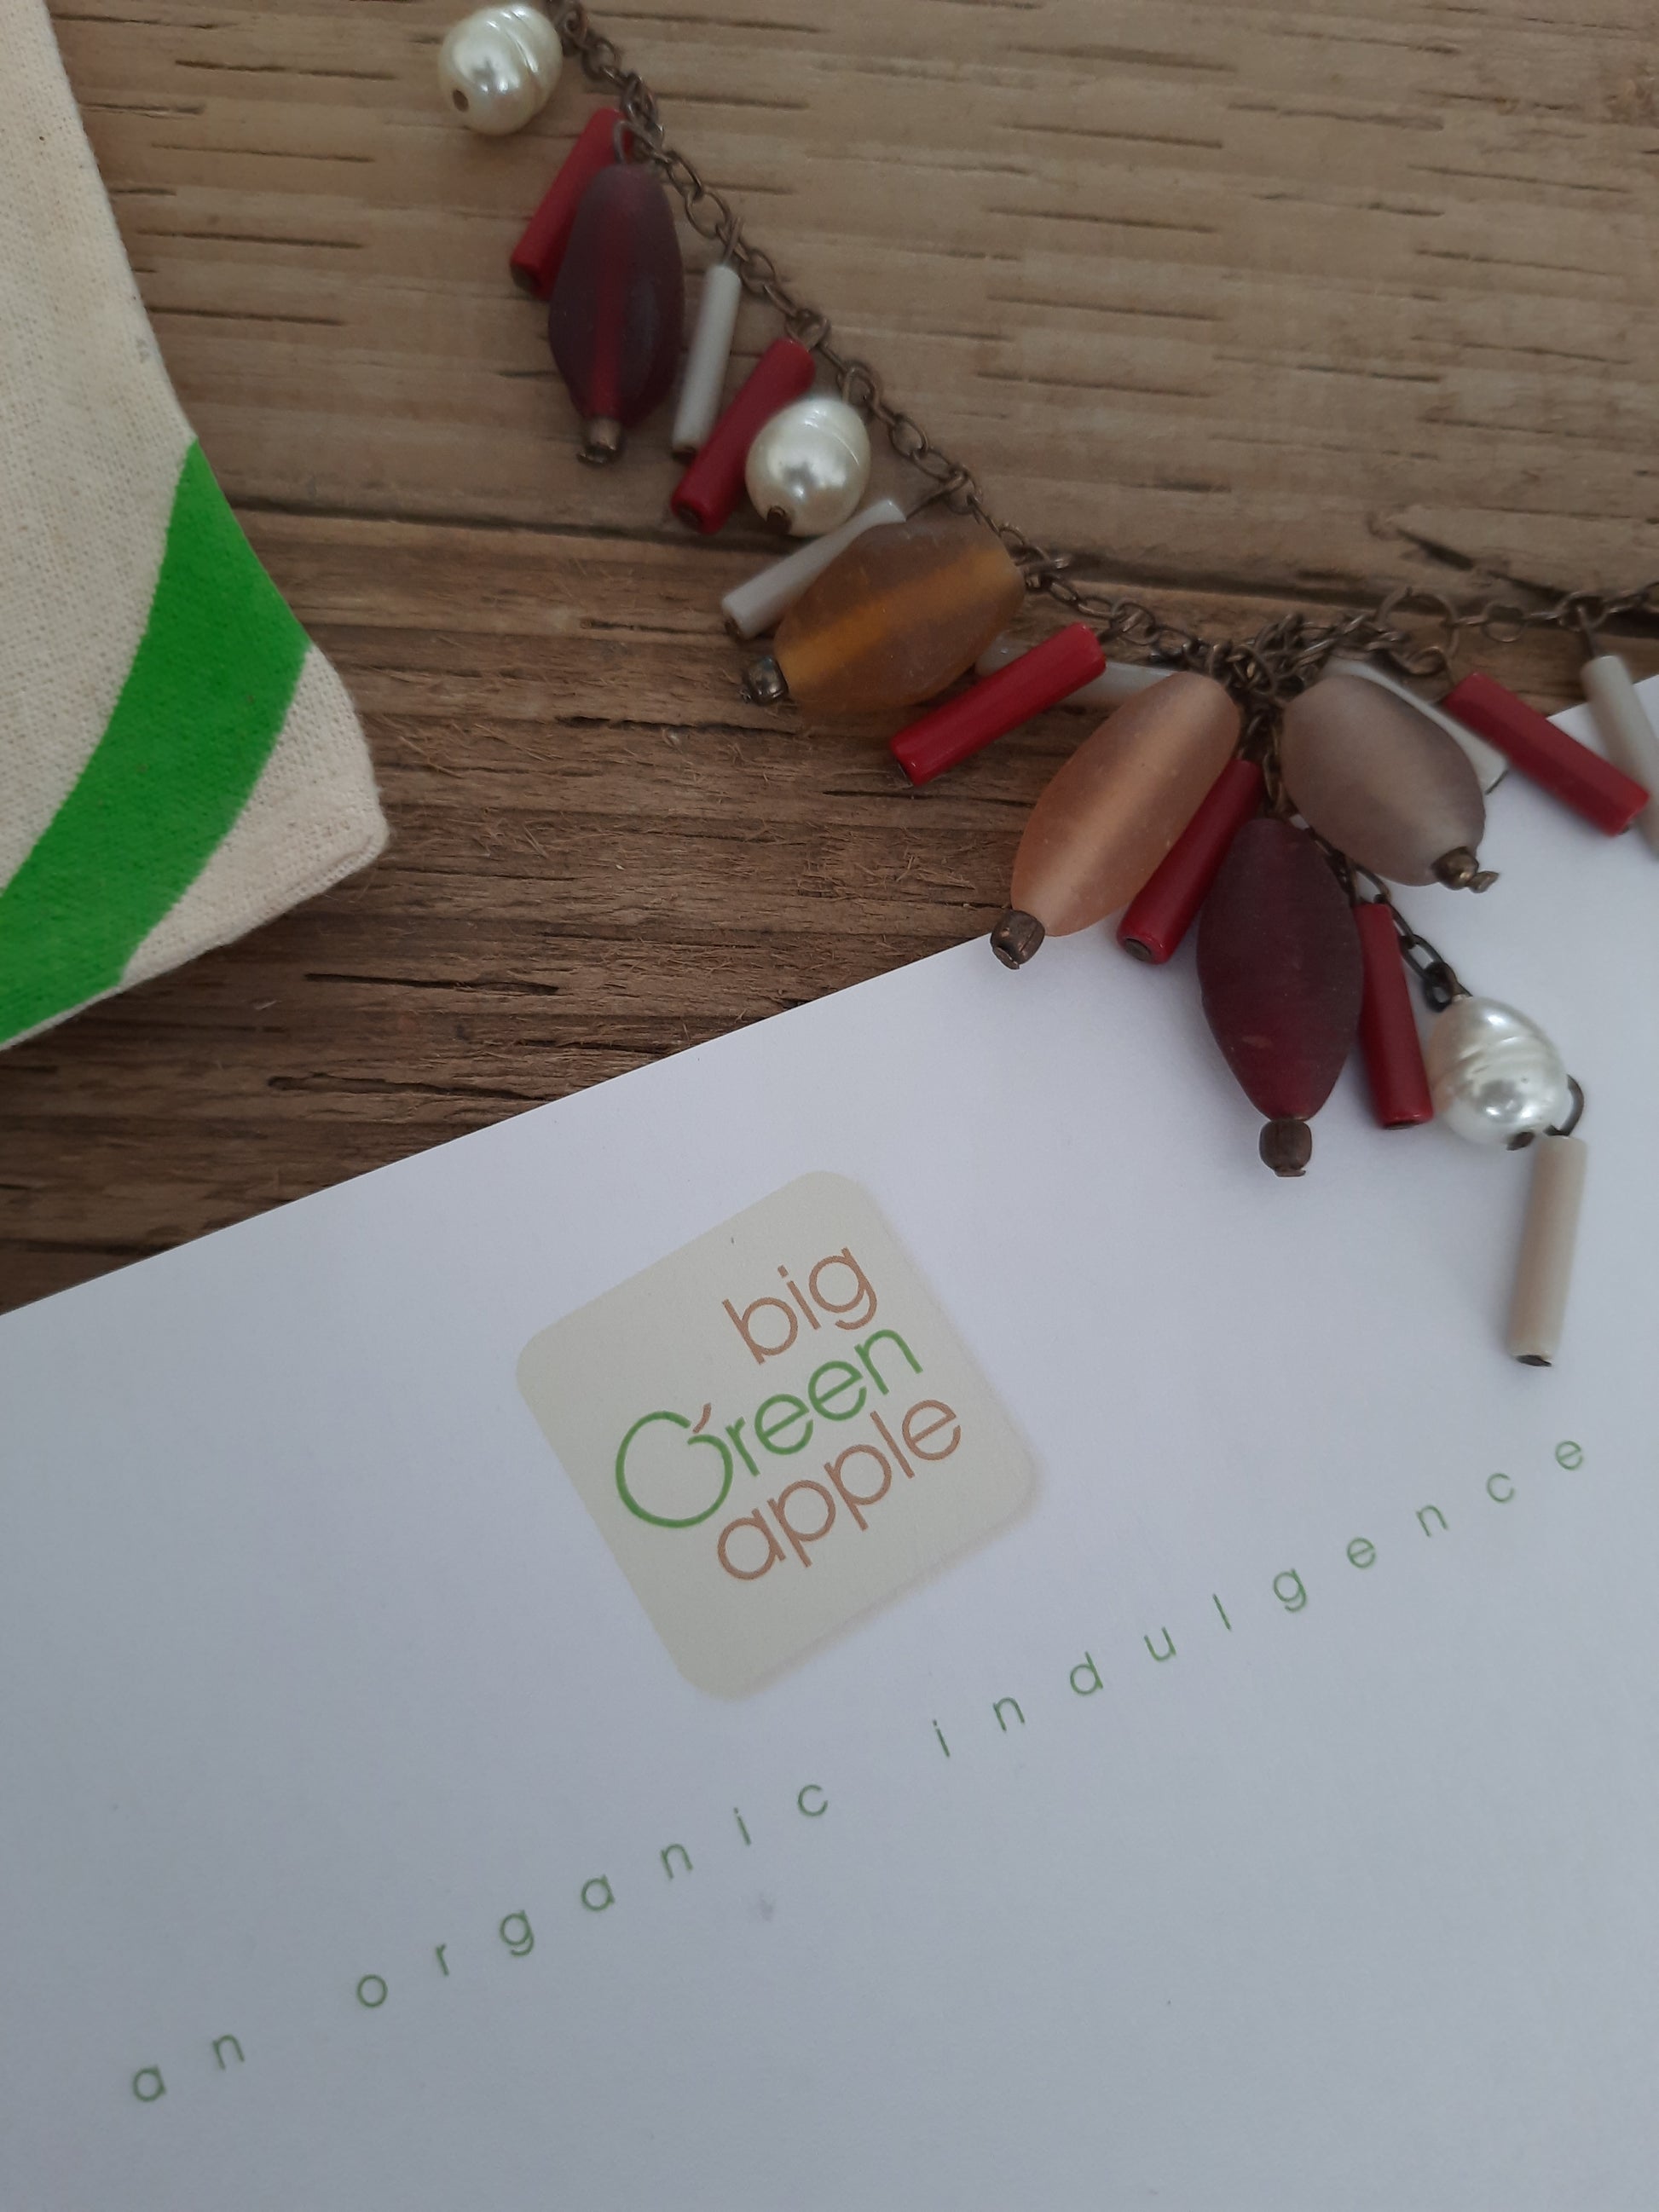 Necklaces, Sustainable Gifts UK, Eco Friendly, Ethical Presents, Christmas Gift Ideas, Fair Trade Jewellery, Fair Trade Organizations, BIG GREEN APPLE 